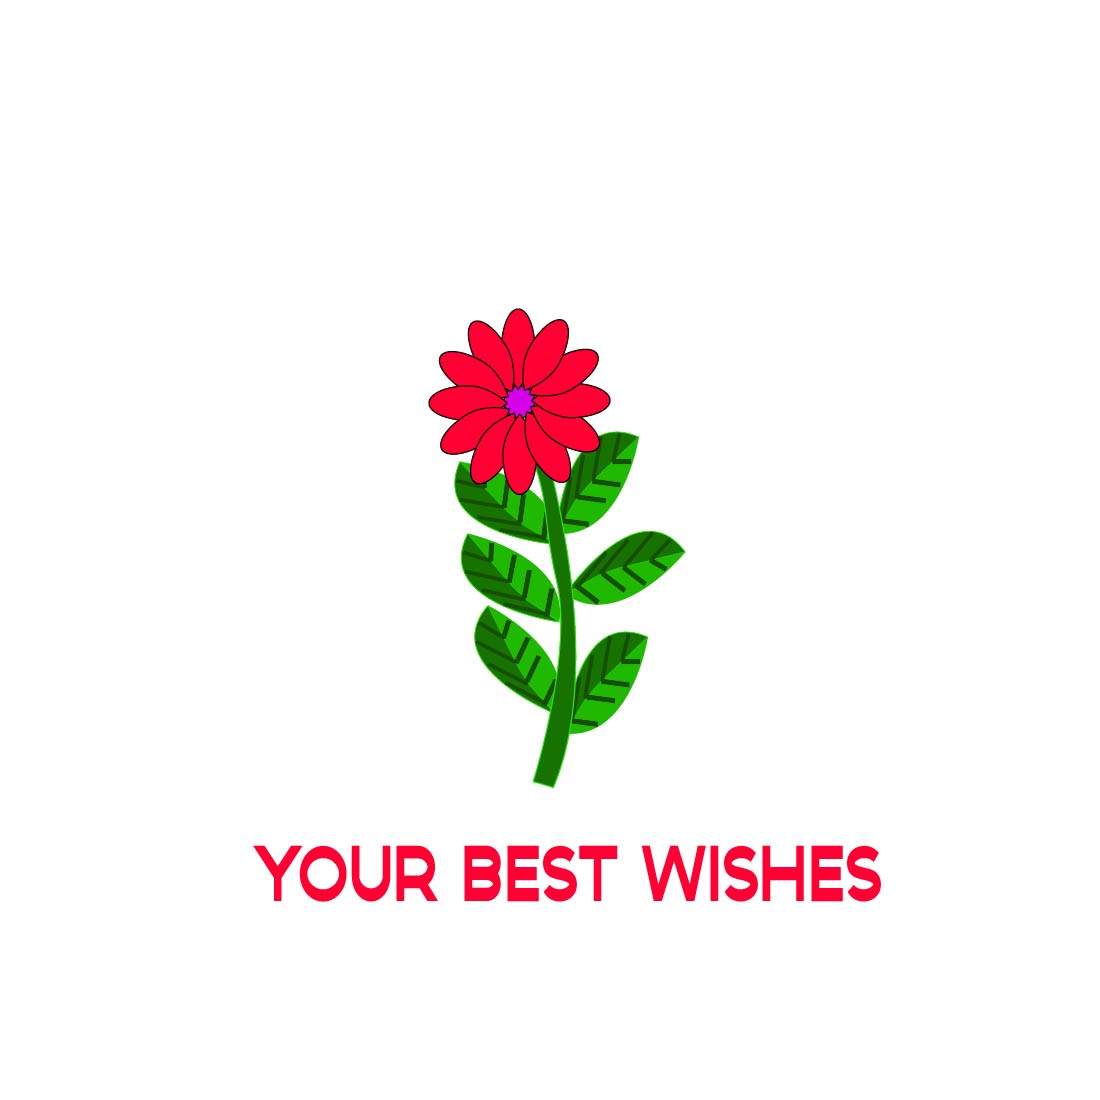 YOUR BEST WISHES preview image.